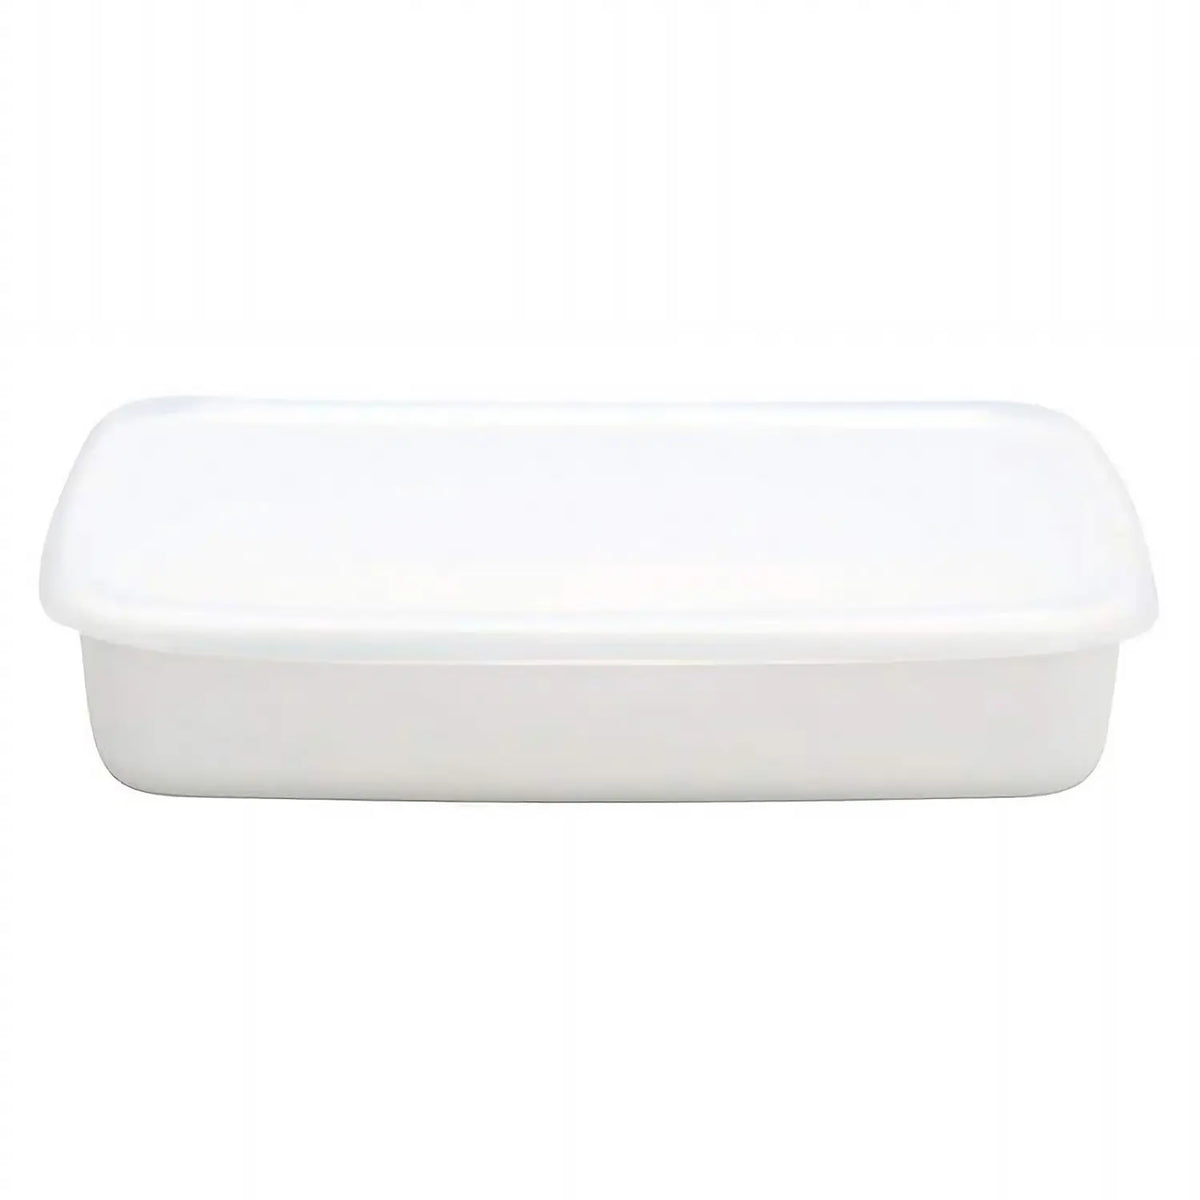 Noda Horo White Series Enamel Rectangle Shallow Food Containers with Lid